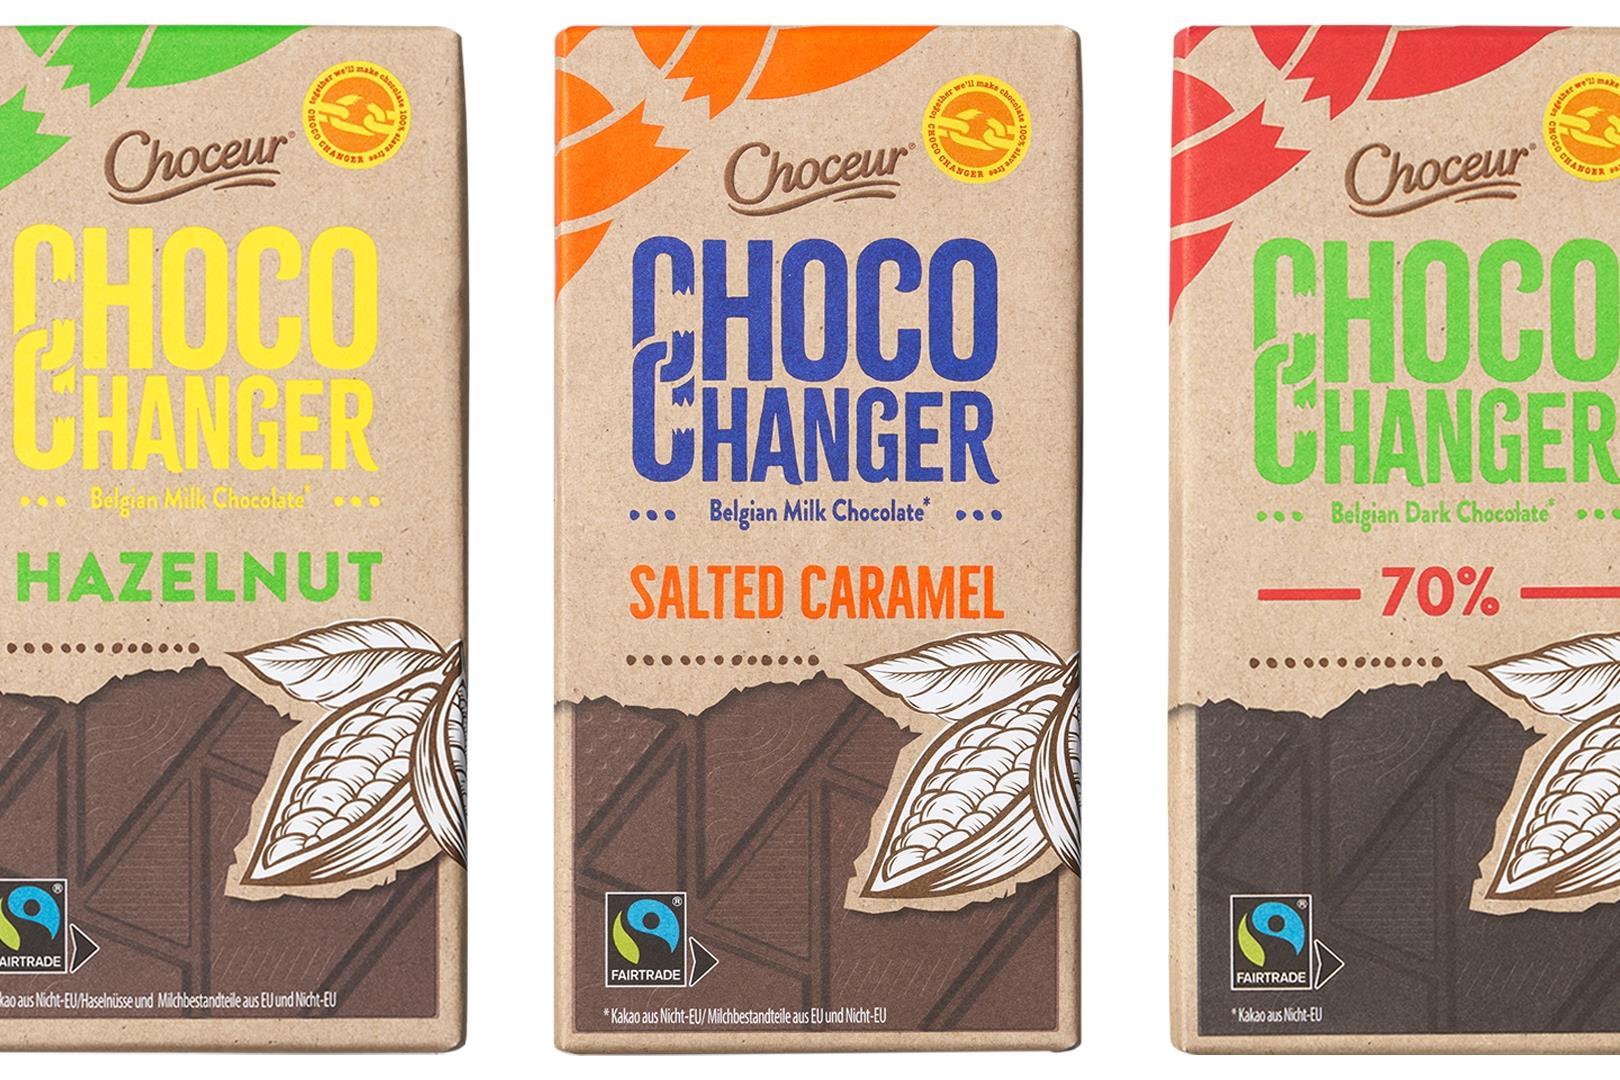 Tony's Chocolonely launches Choco Changer own label brand with ...